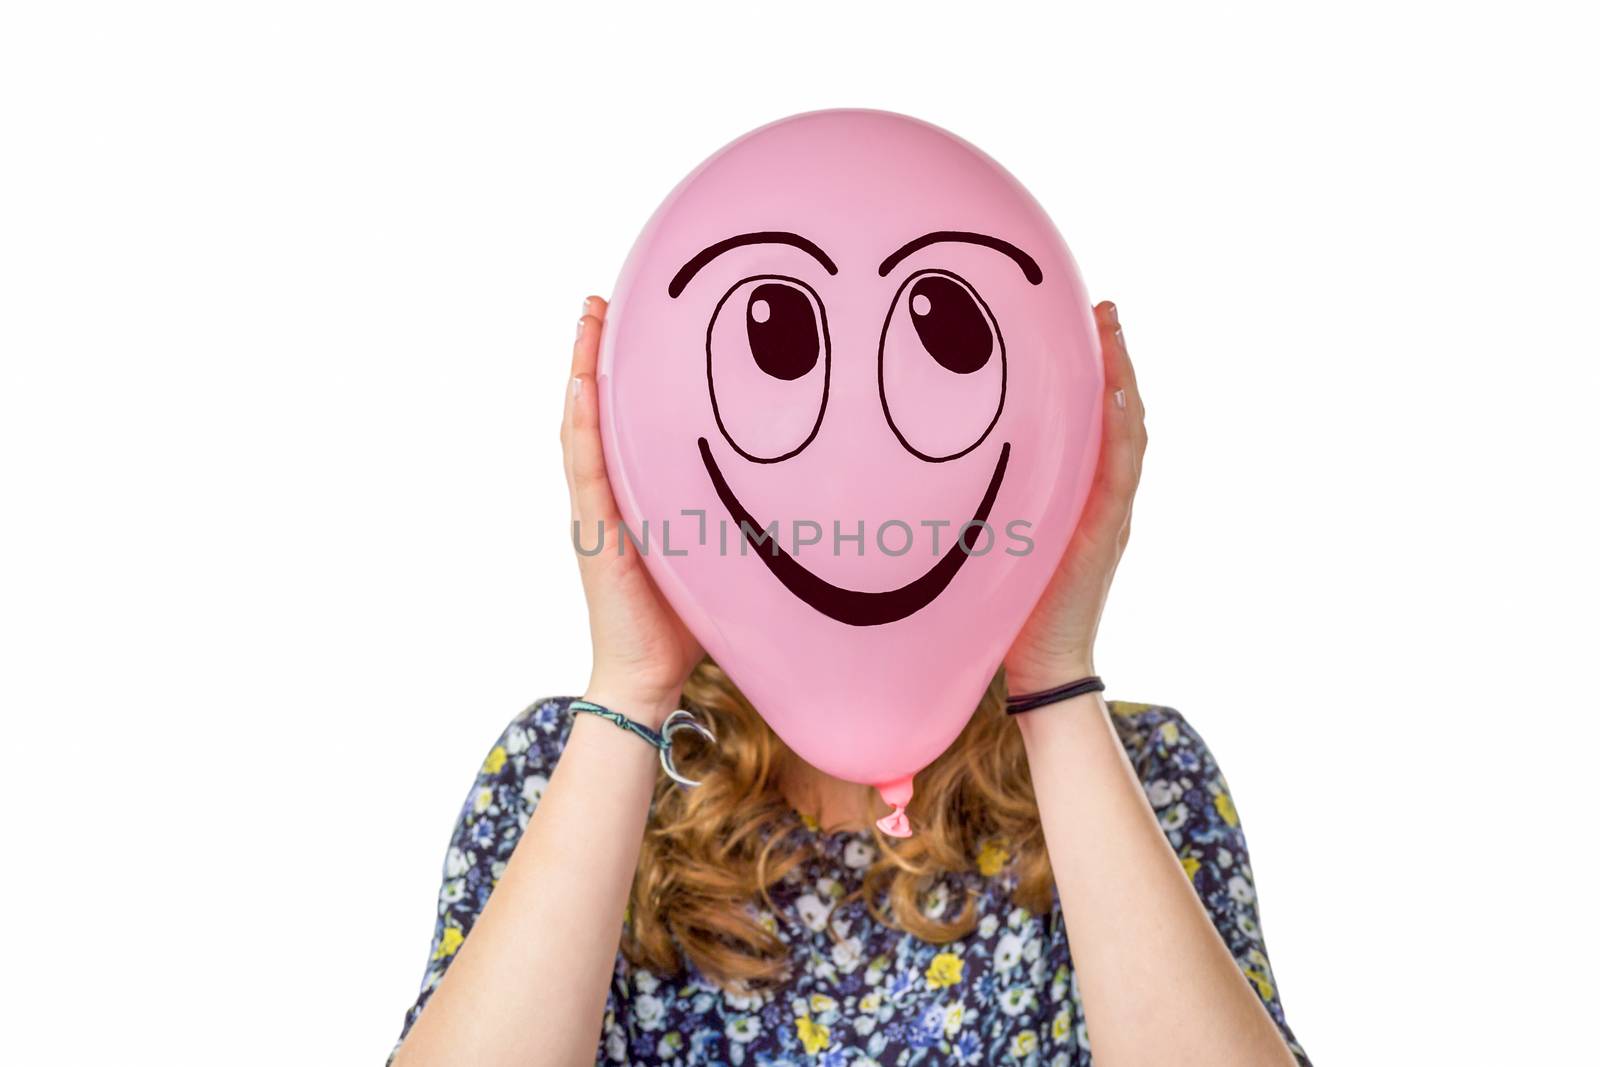 Girl holding pink balloon with smiling facial expression